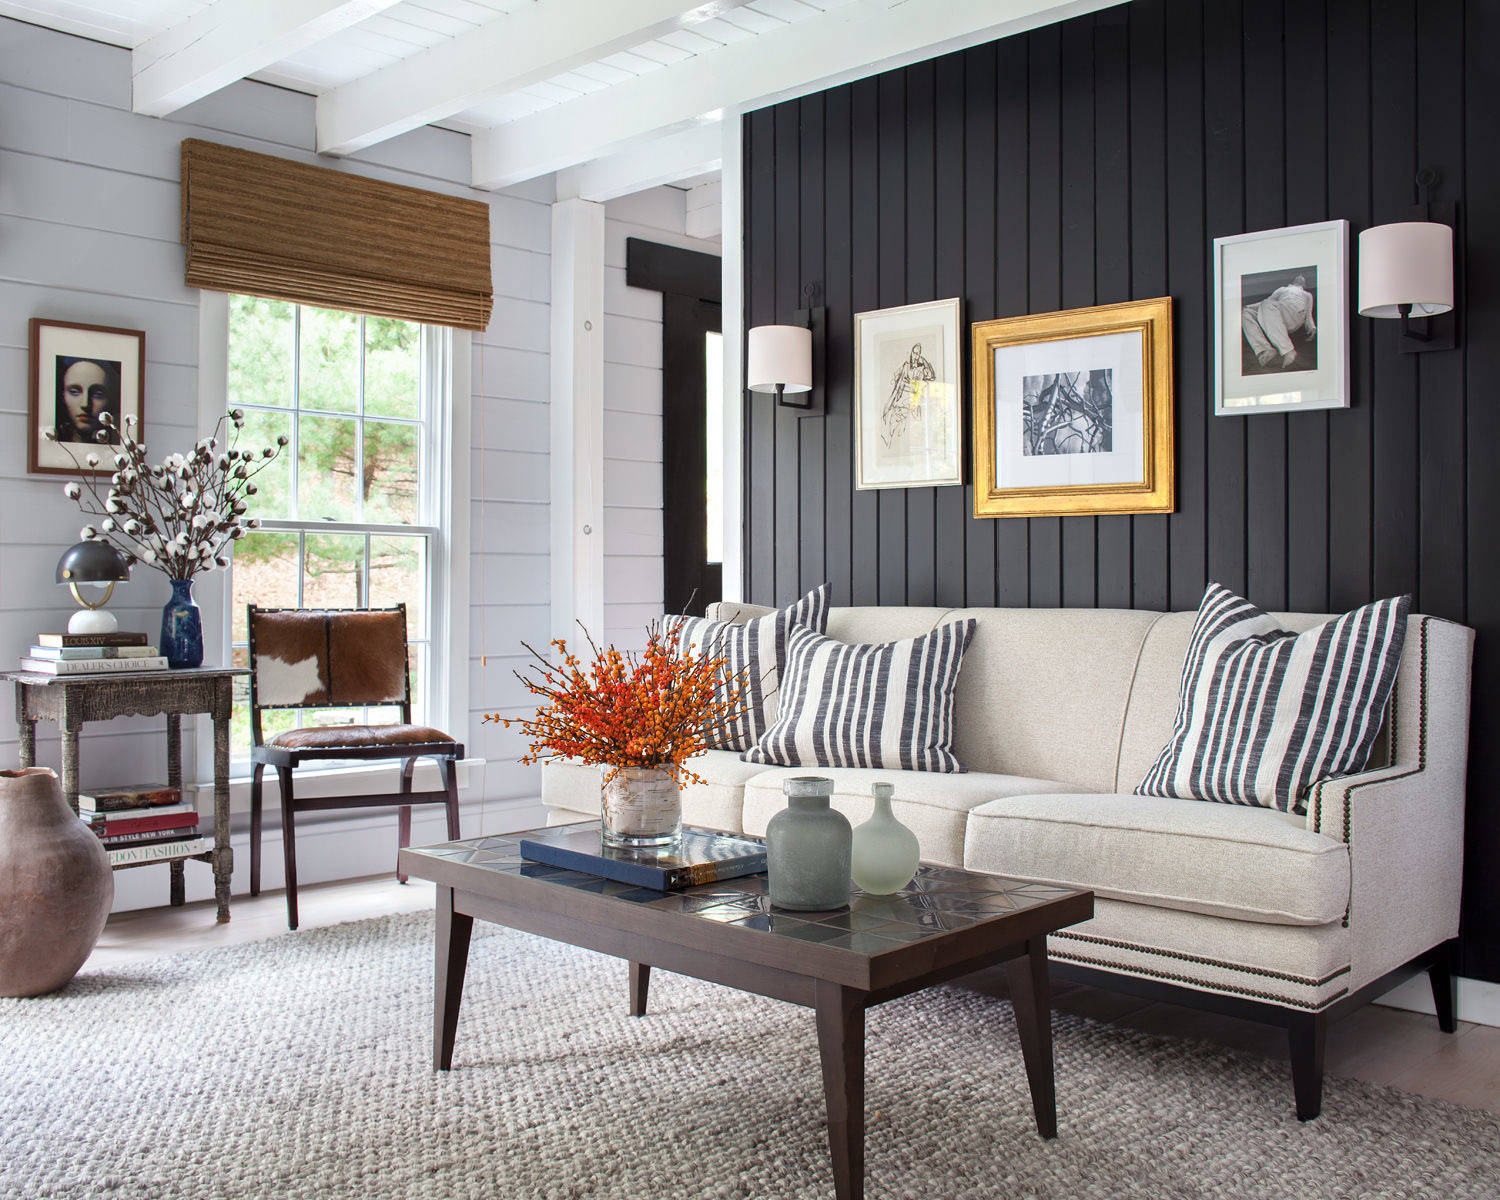 75 Living Room with Black Walls Ideas You'll Love - January, 2023 | Houzz